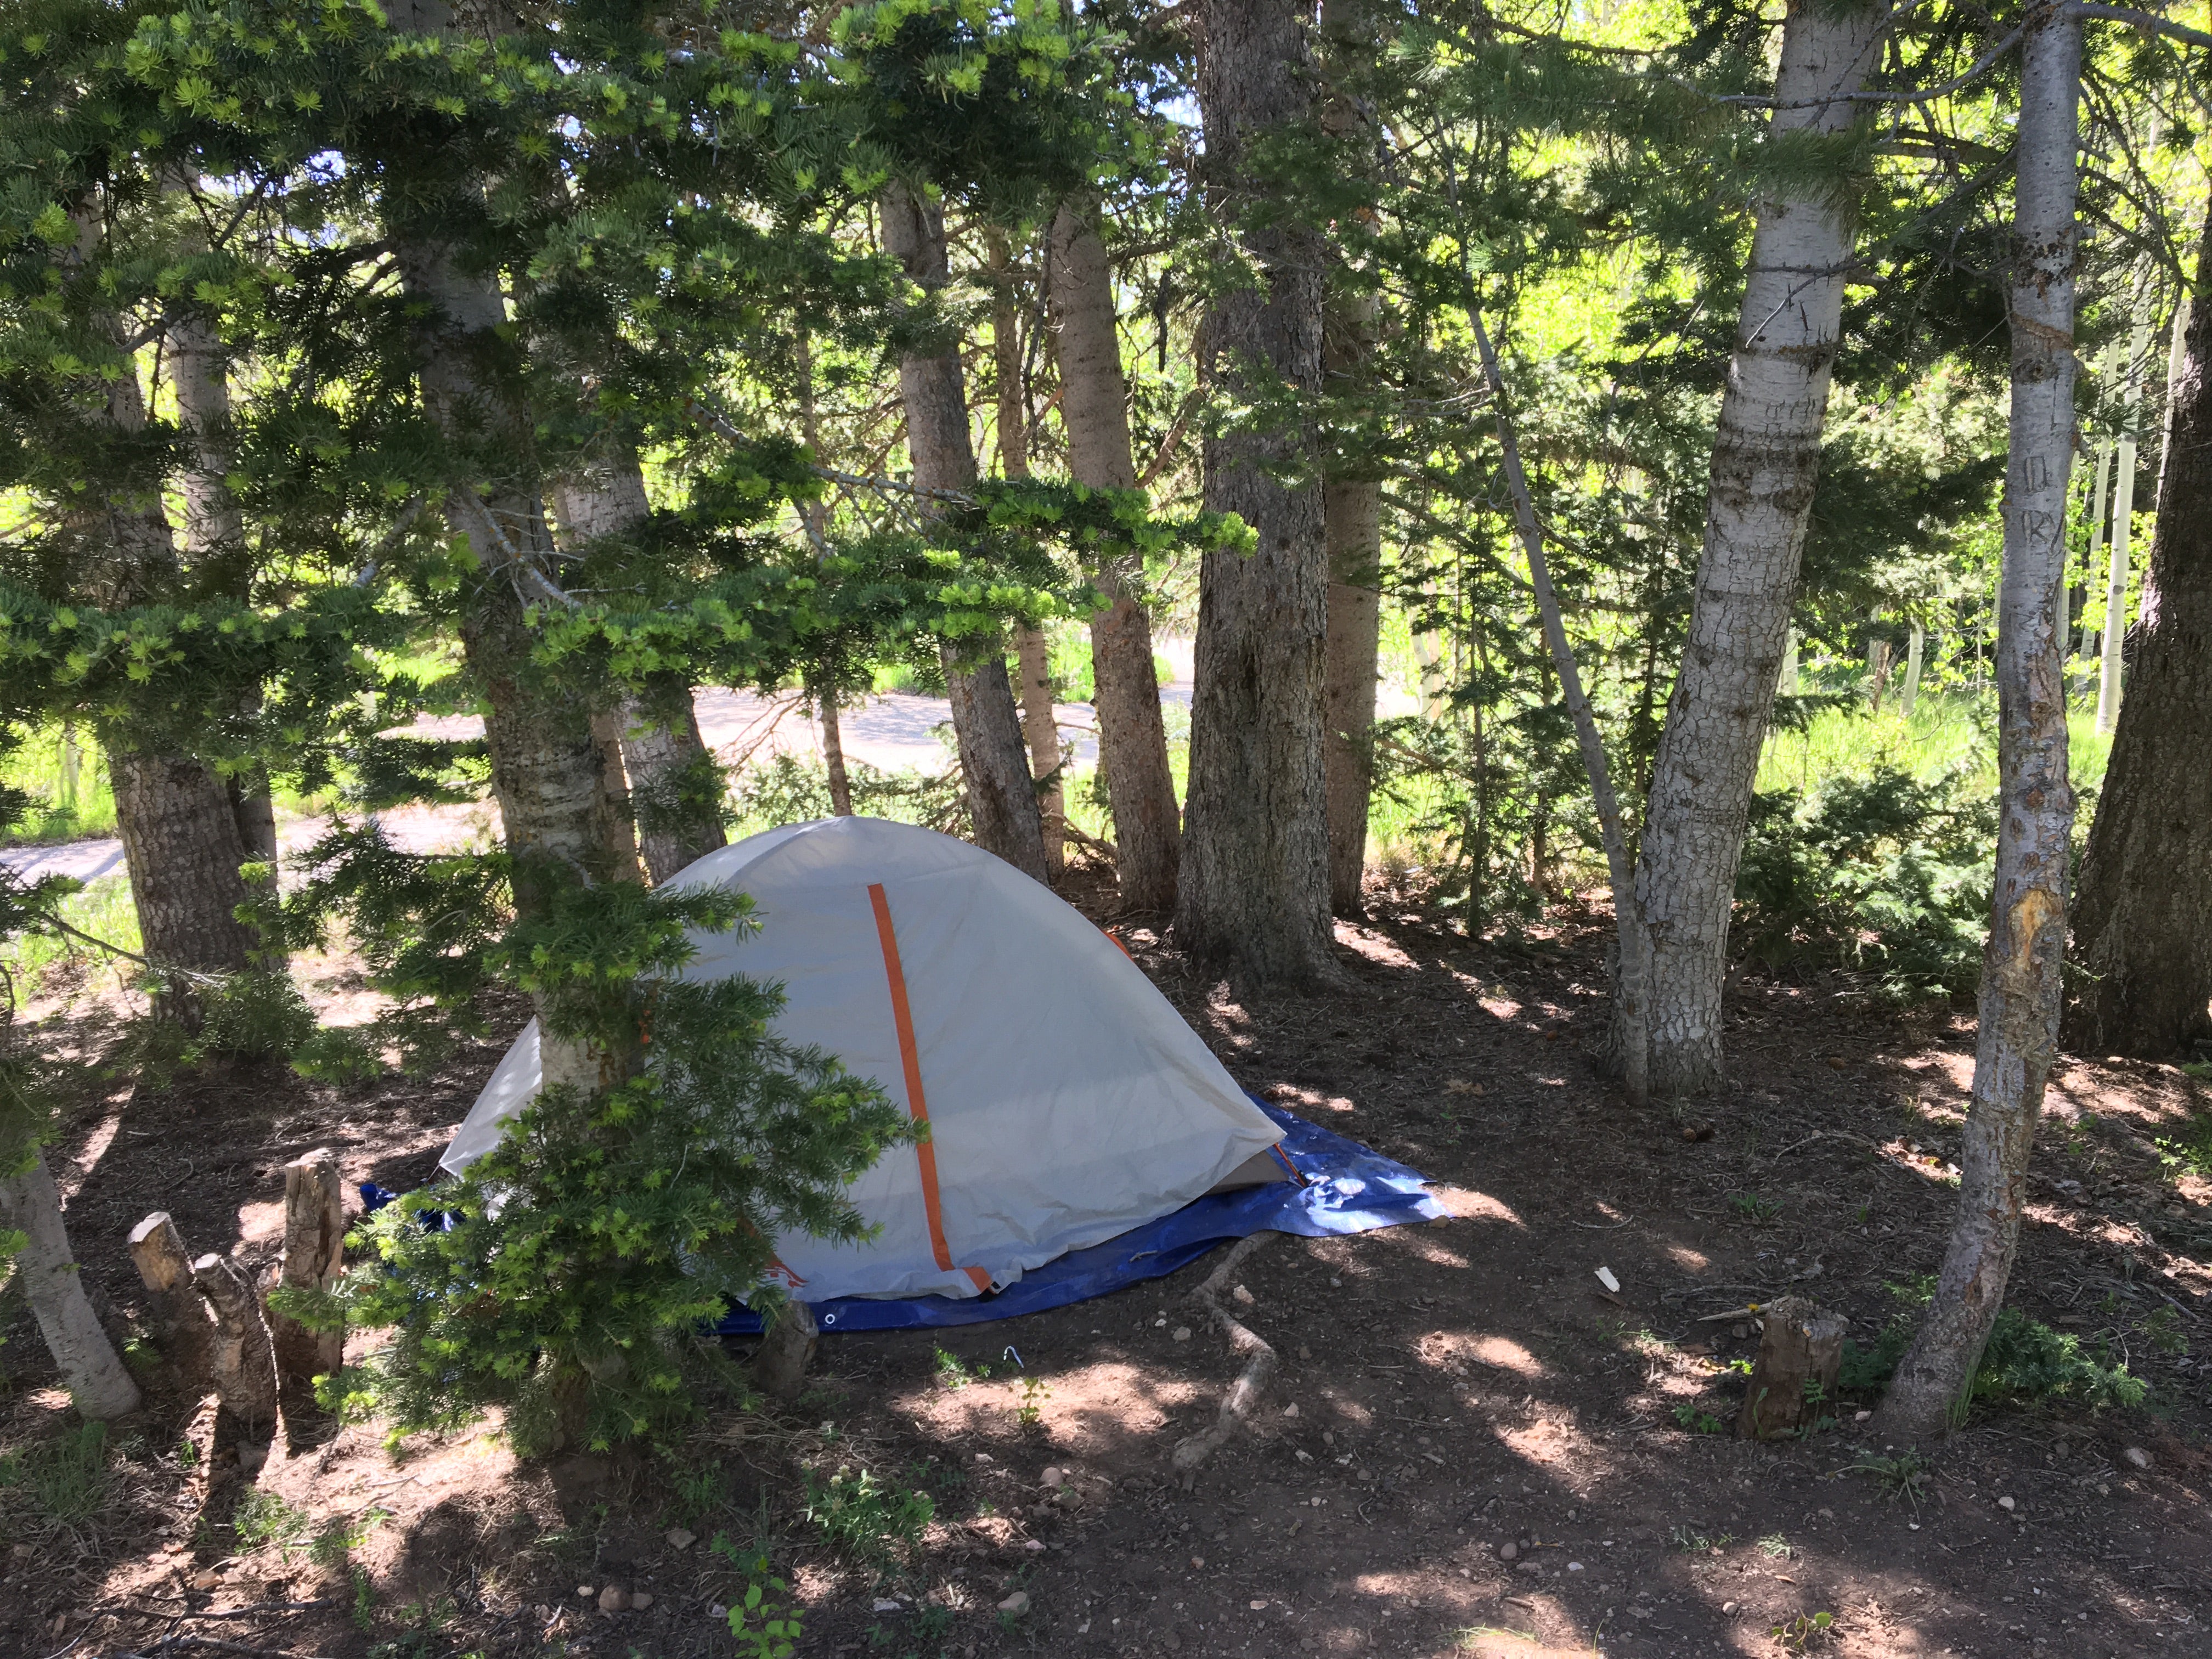 One tent in nice shady spot